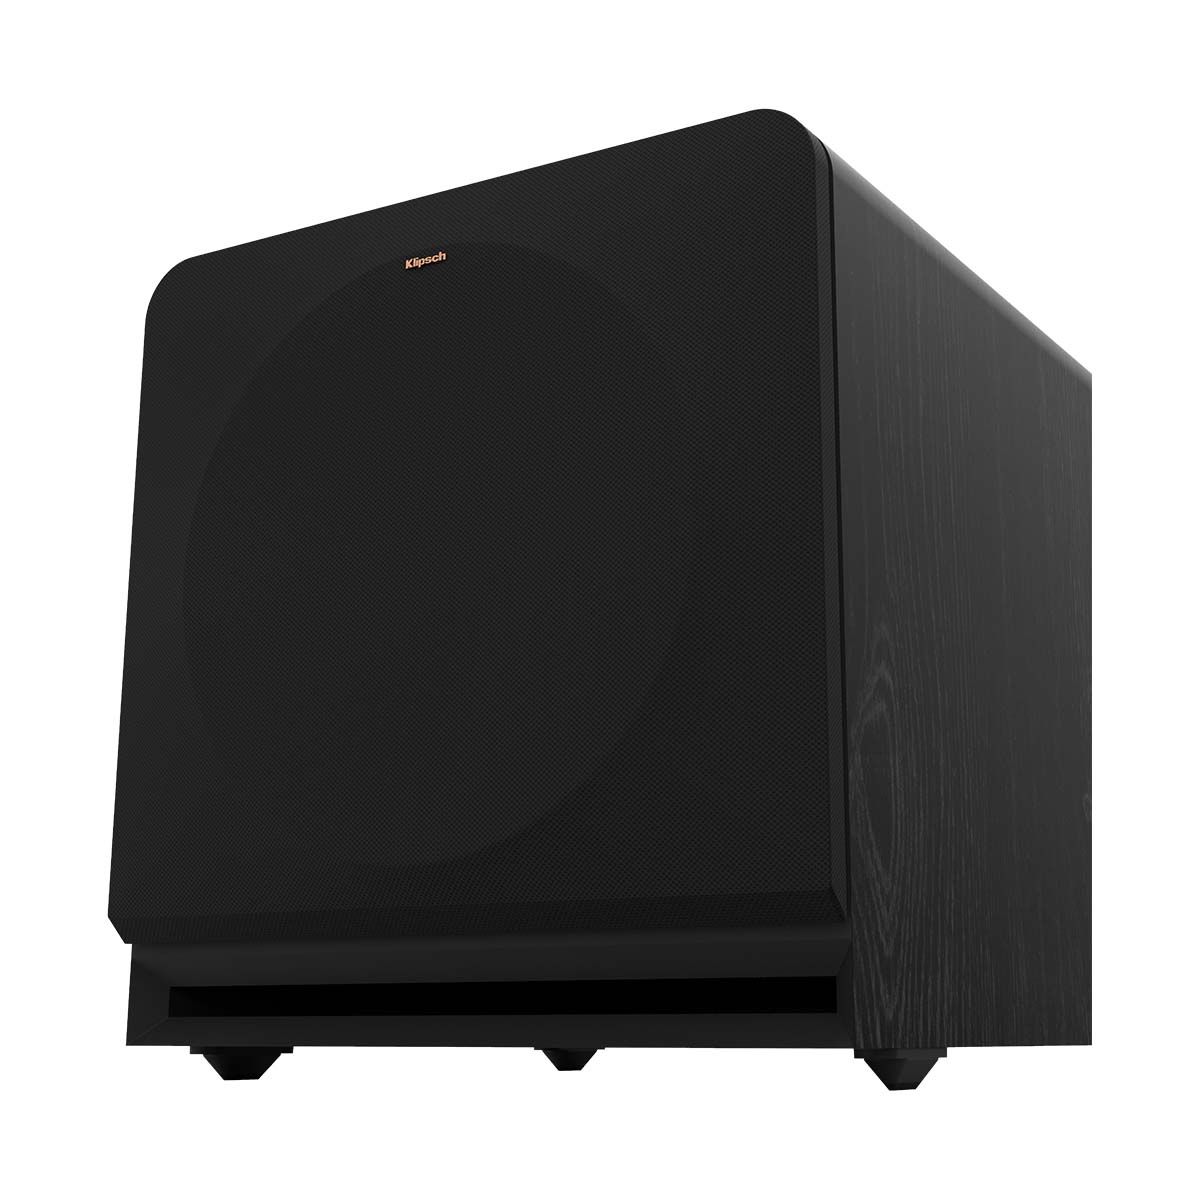 Klipsch RP-1400SW 14" Powered Subwoofer - Ebony - angled front right view with grille